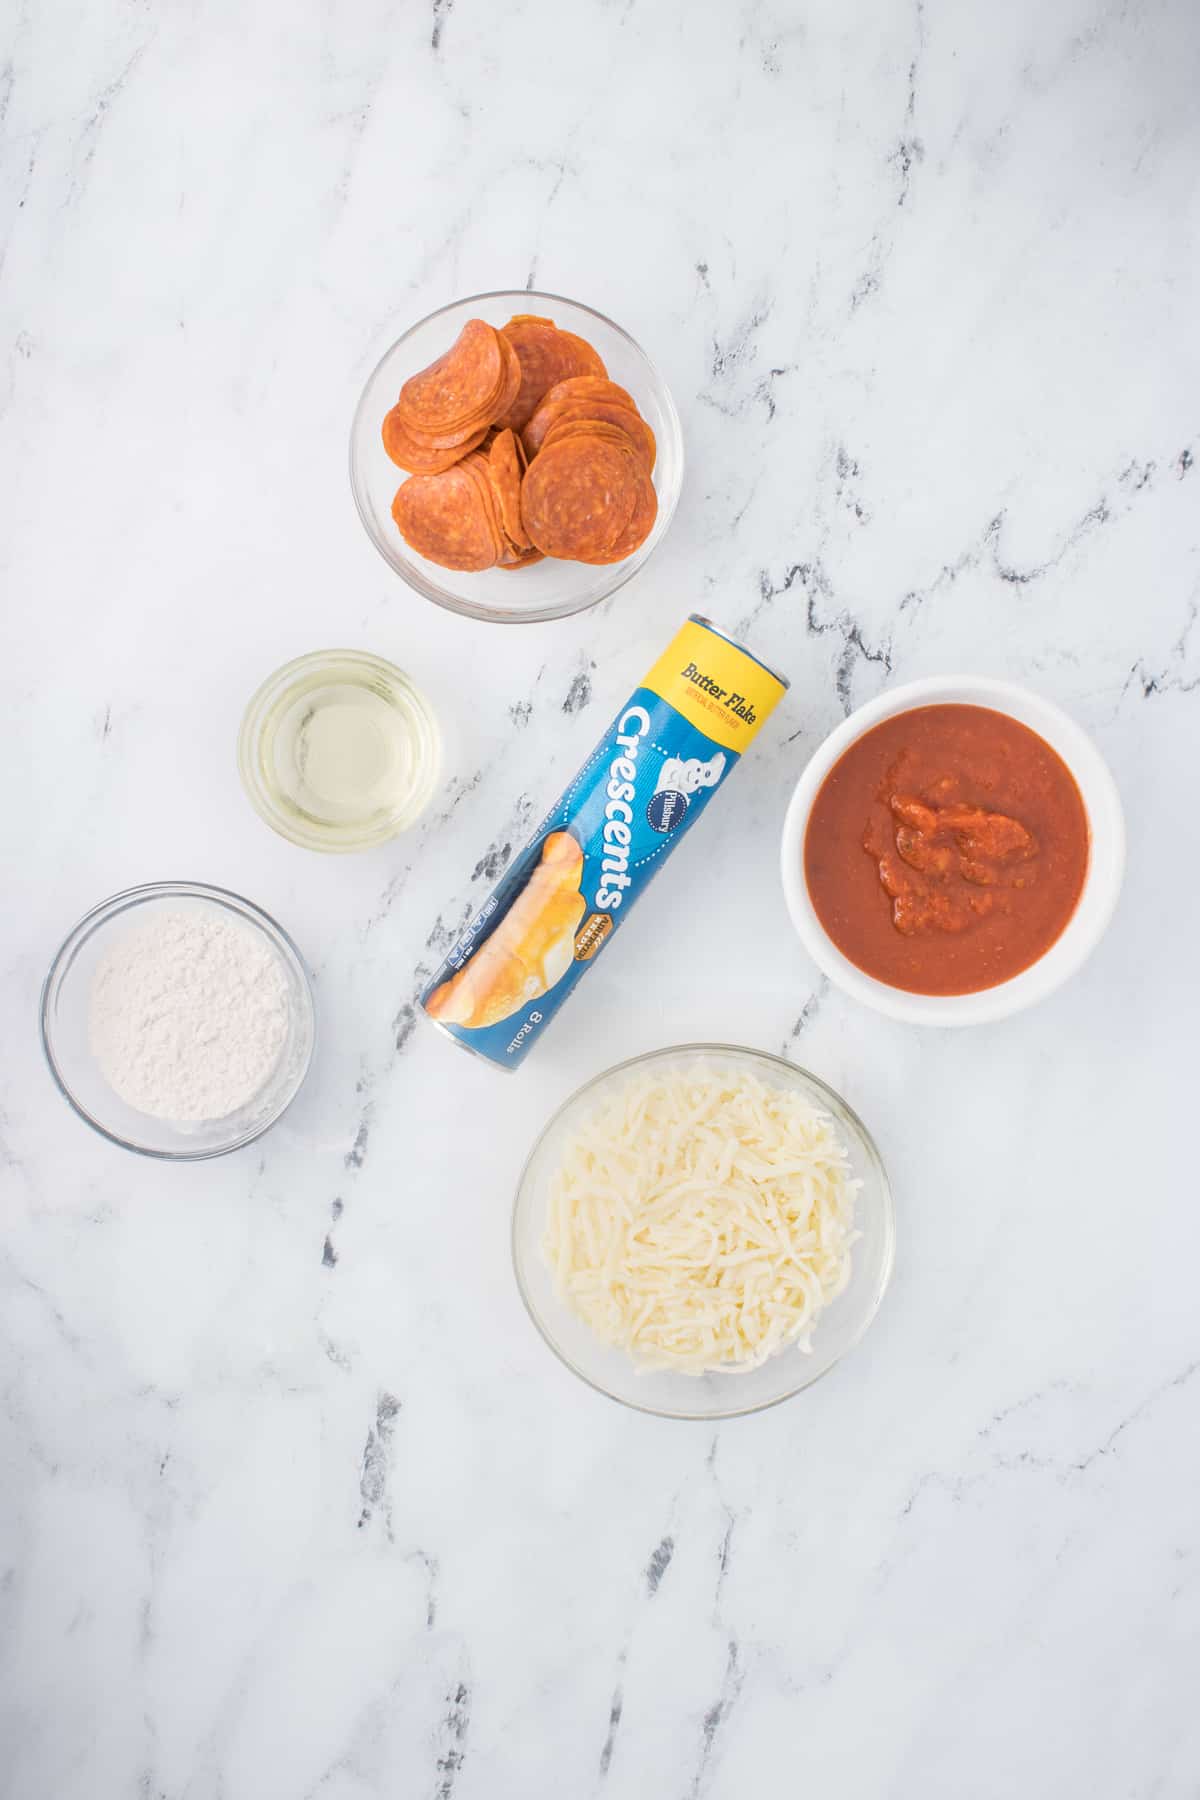 In this image, you can see a collection of ingredients ready to be used. The ingredients include crescent roll dough, shredded mozzarella cheese, pizza sauce, chopped pepperoni slices, all-purpose flour, and oil. 